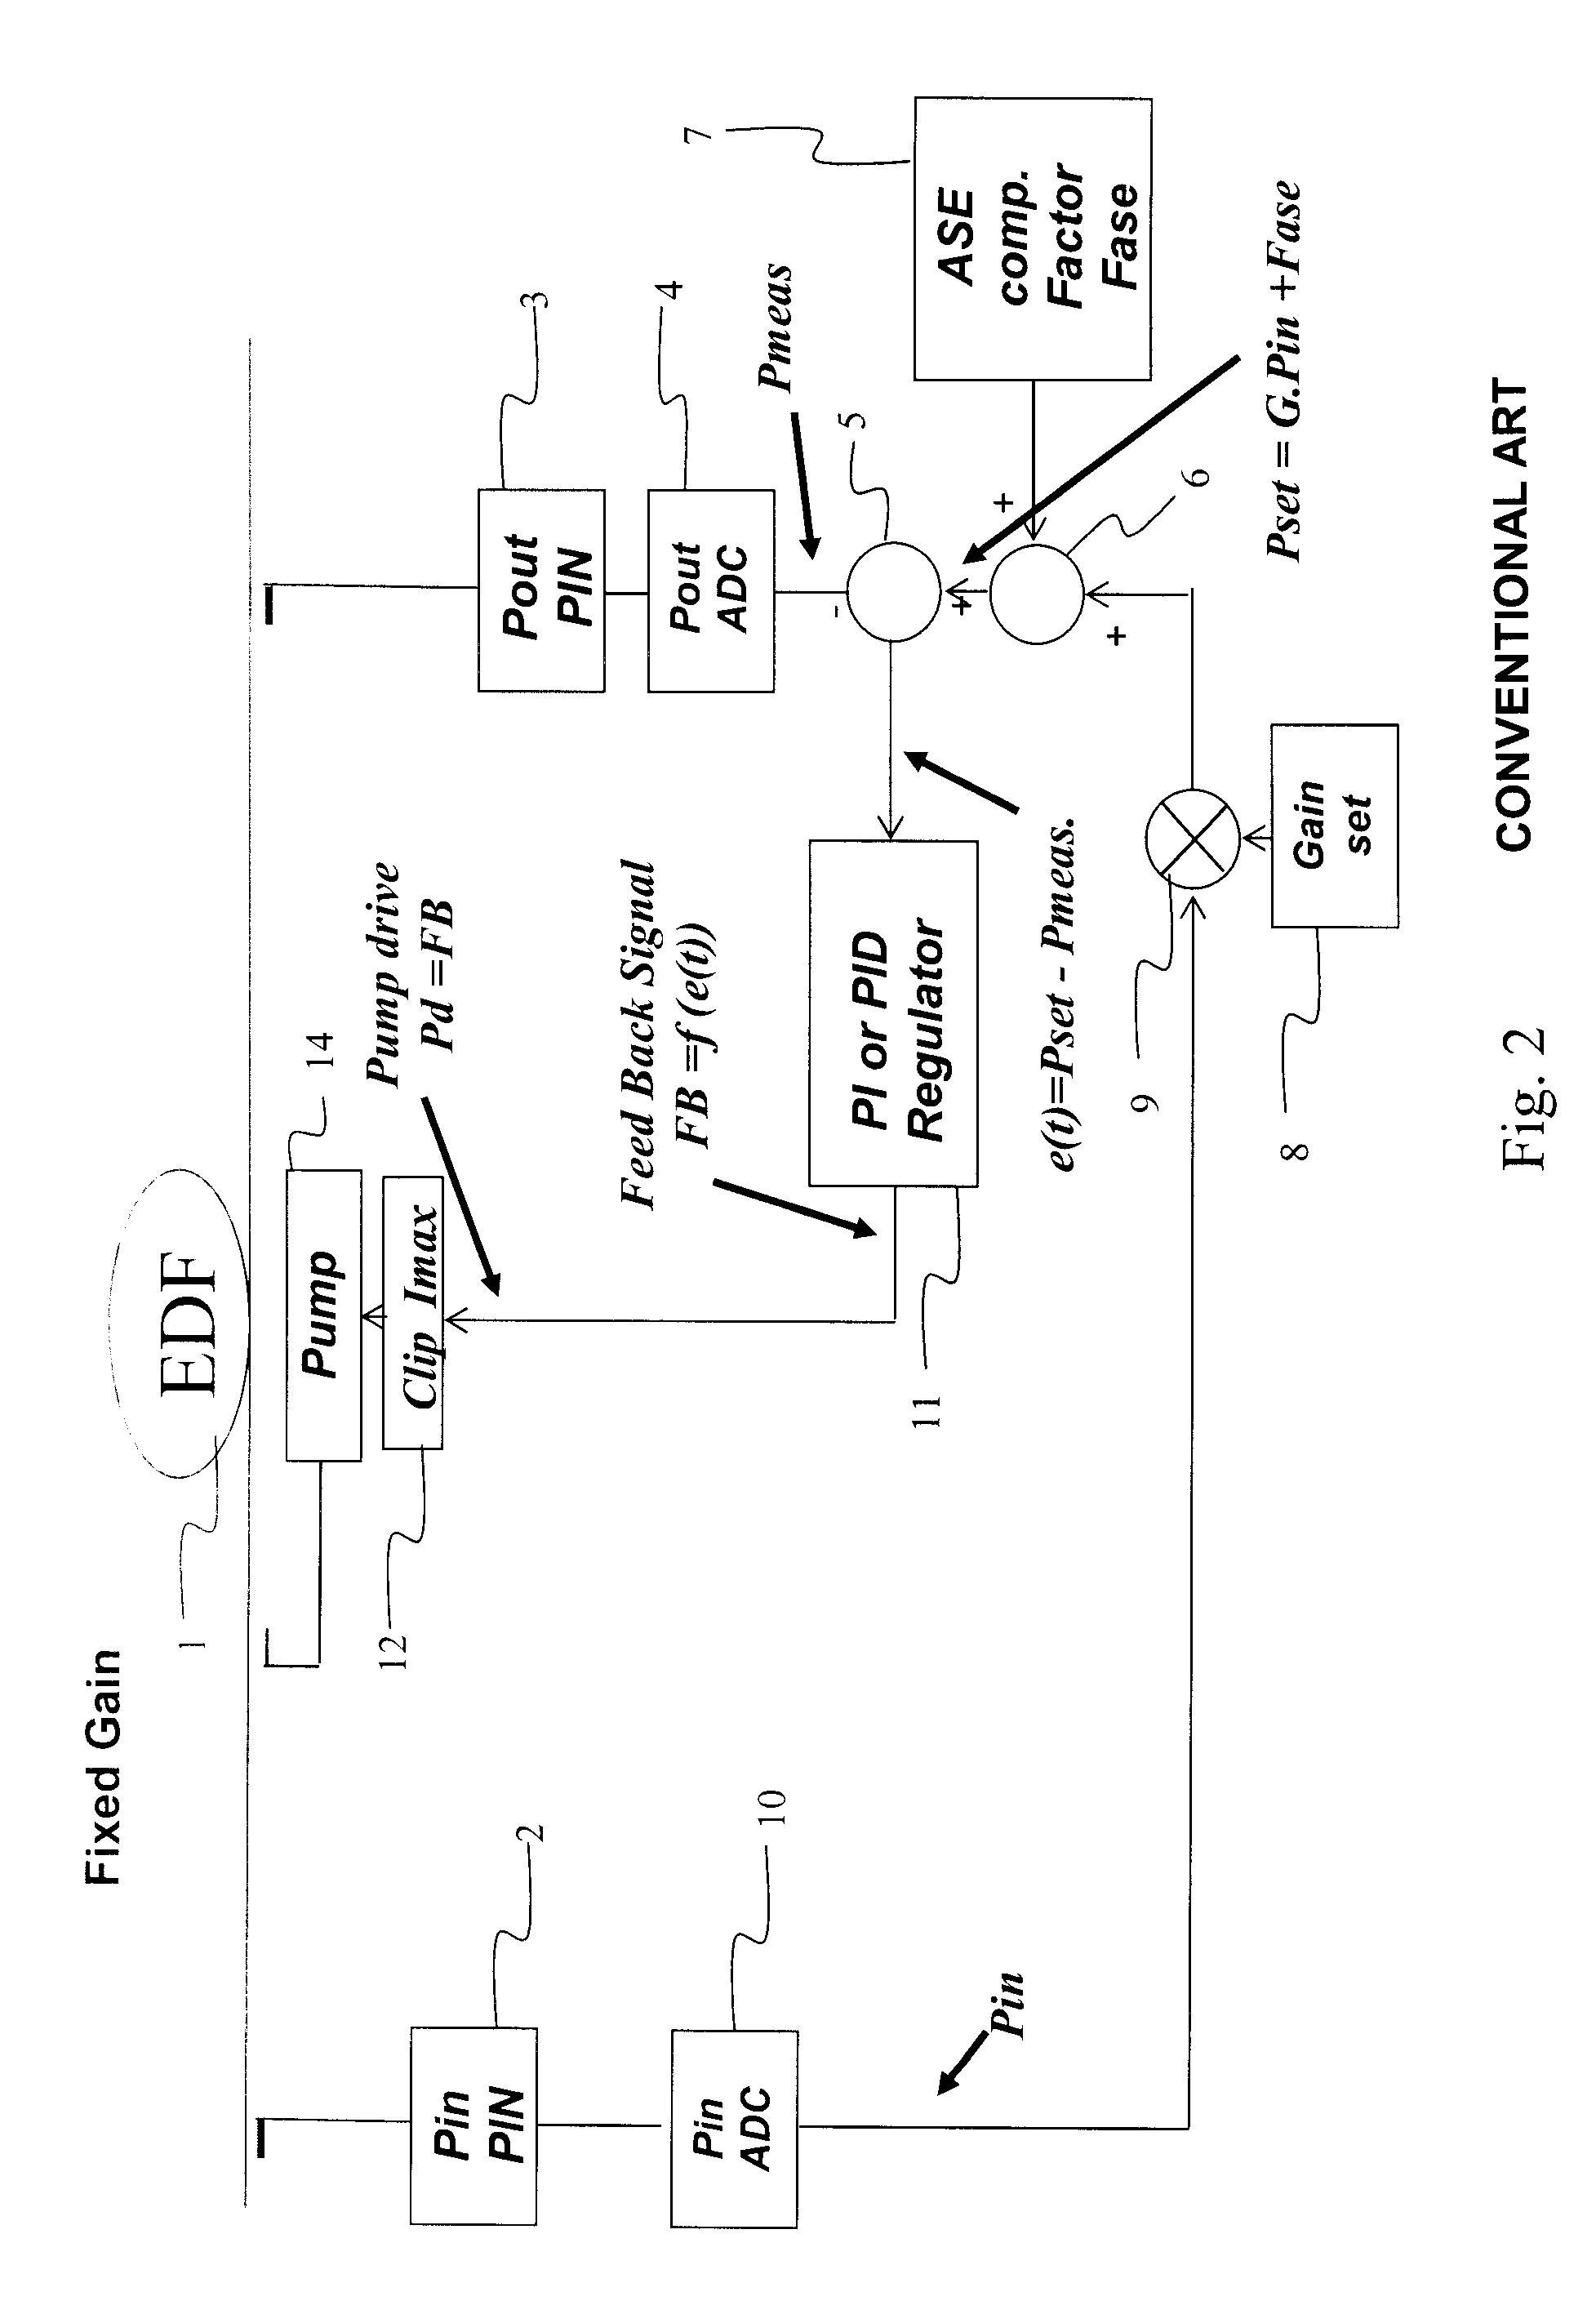 Variable gain optical amplifiers